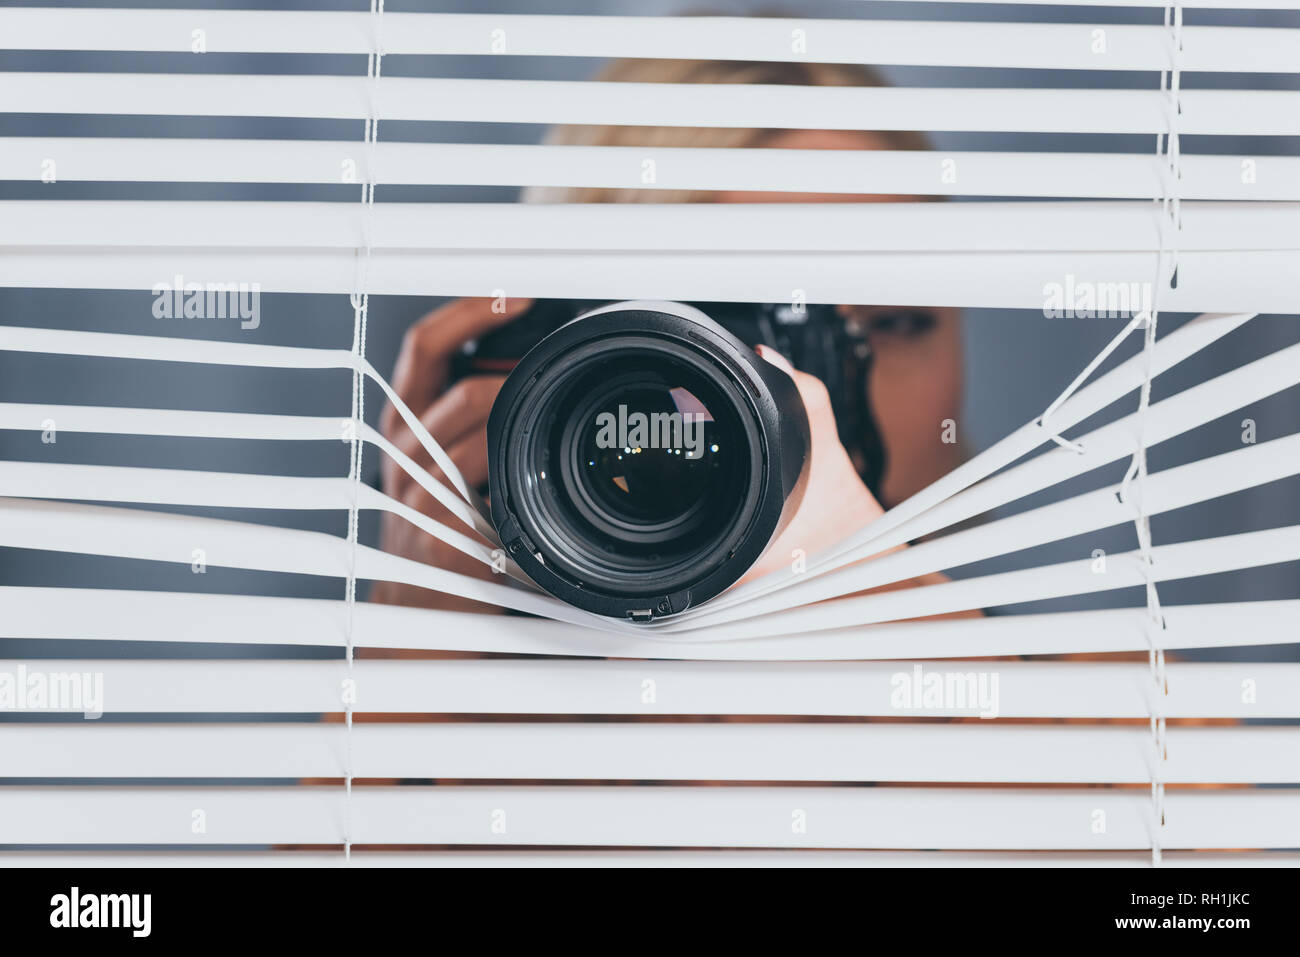 young woman photographing with camera and spying through blinds Stock Photo